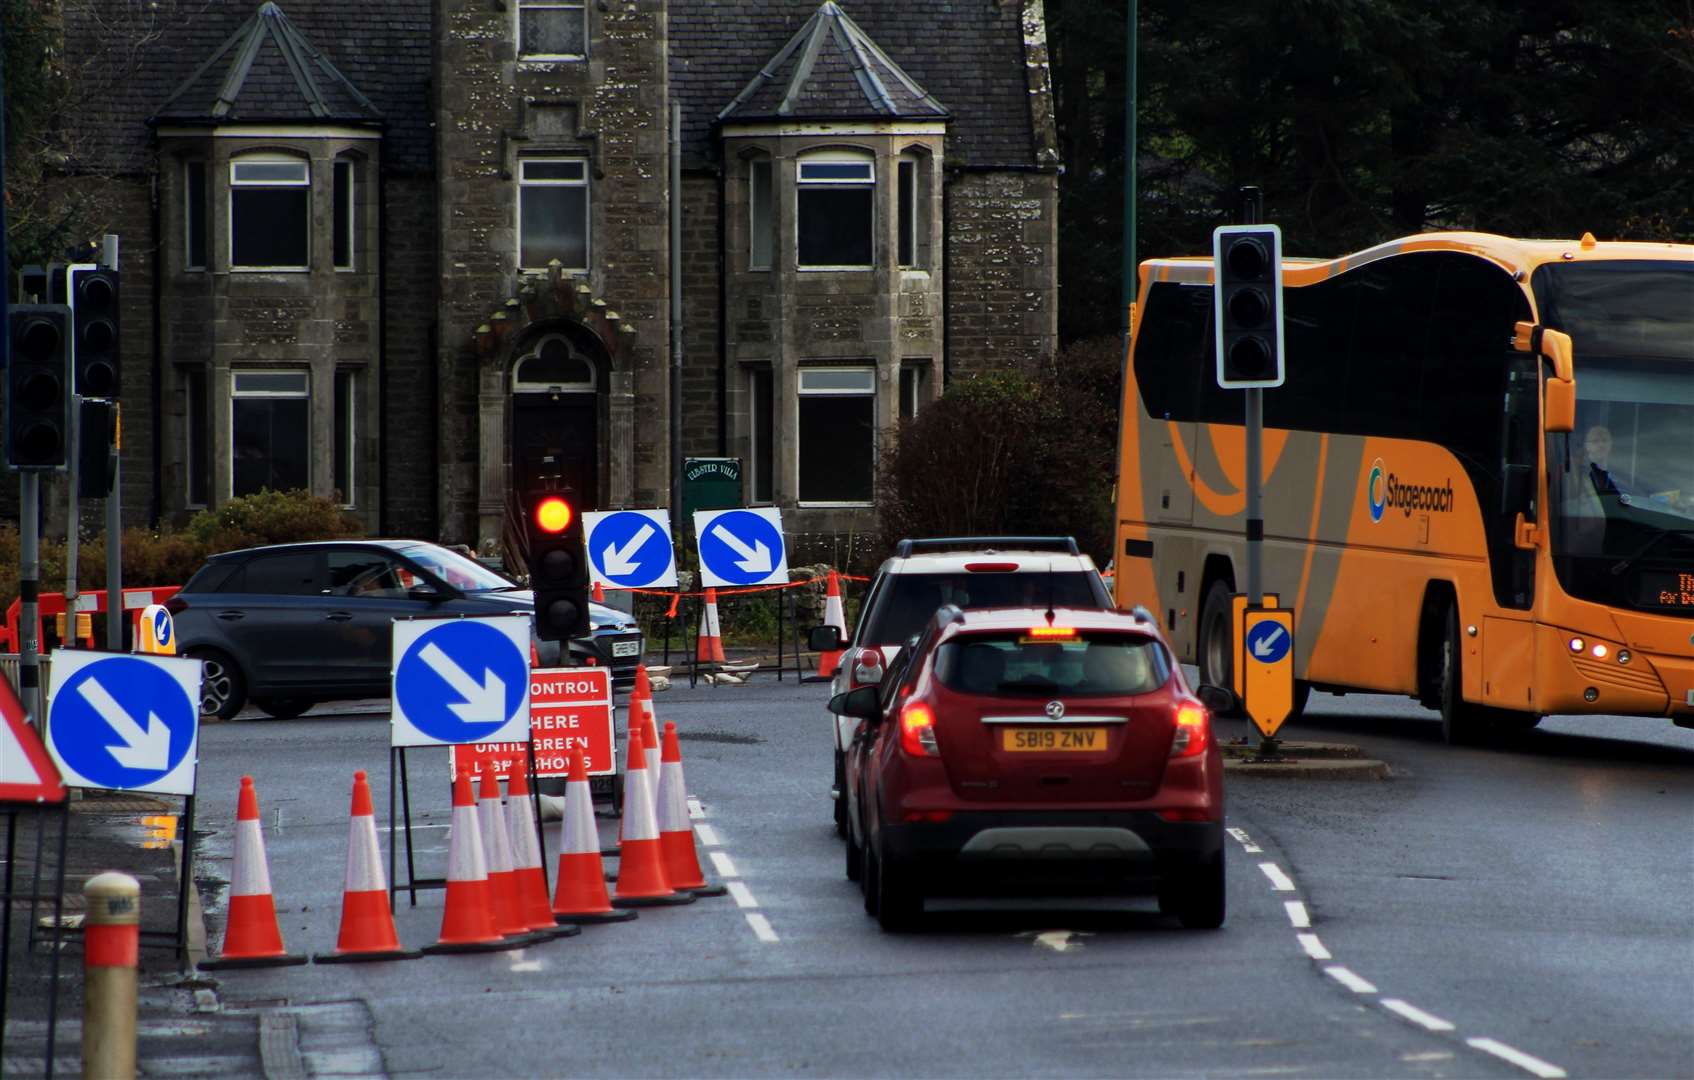 The scheme is aimed at improving road safety for pedestrians and cyclists. Pictures: Alan Hendry